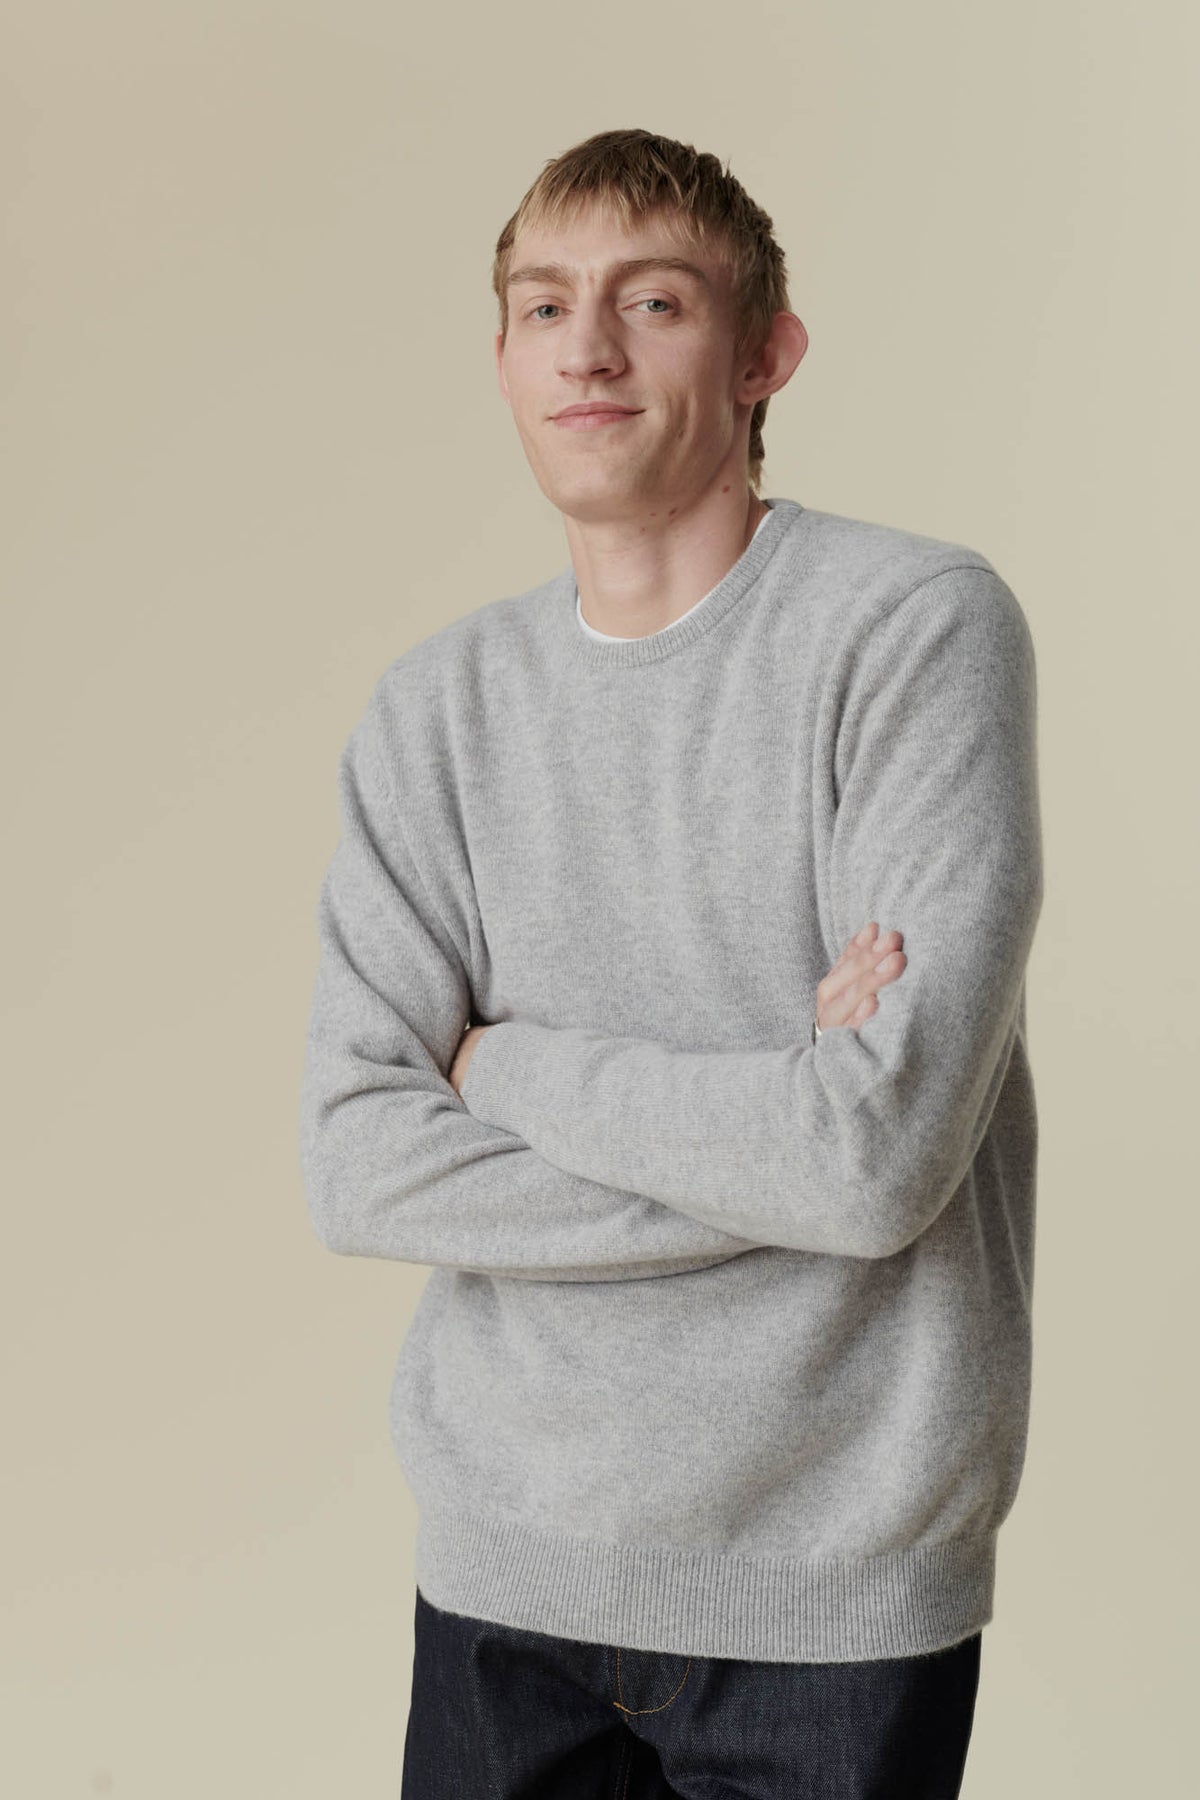 
            Male wearing lambswool crew neck in light grey, male has arms folded facing towards the camera.